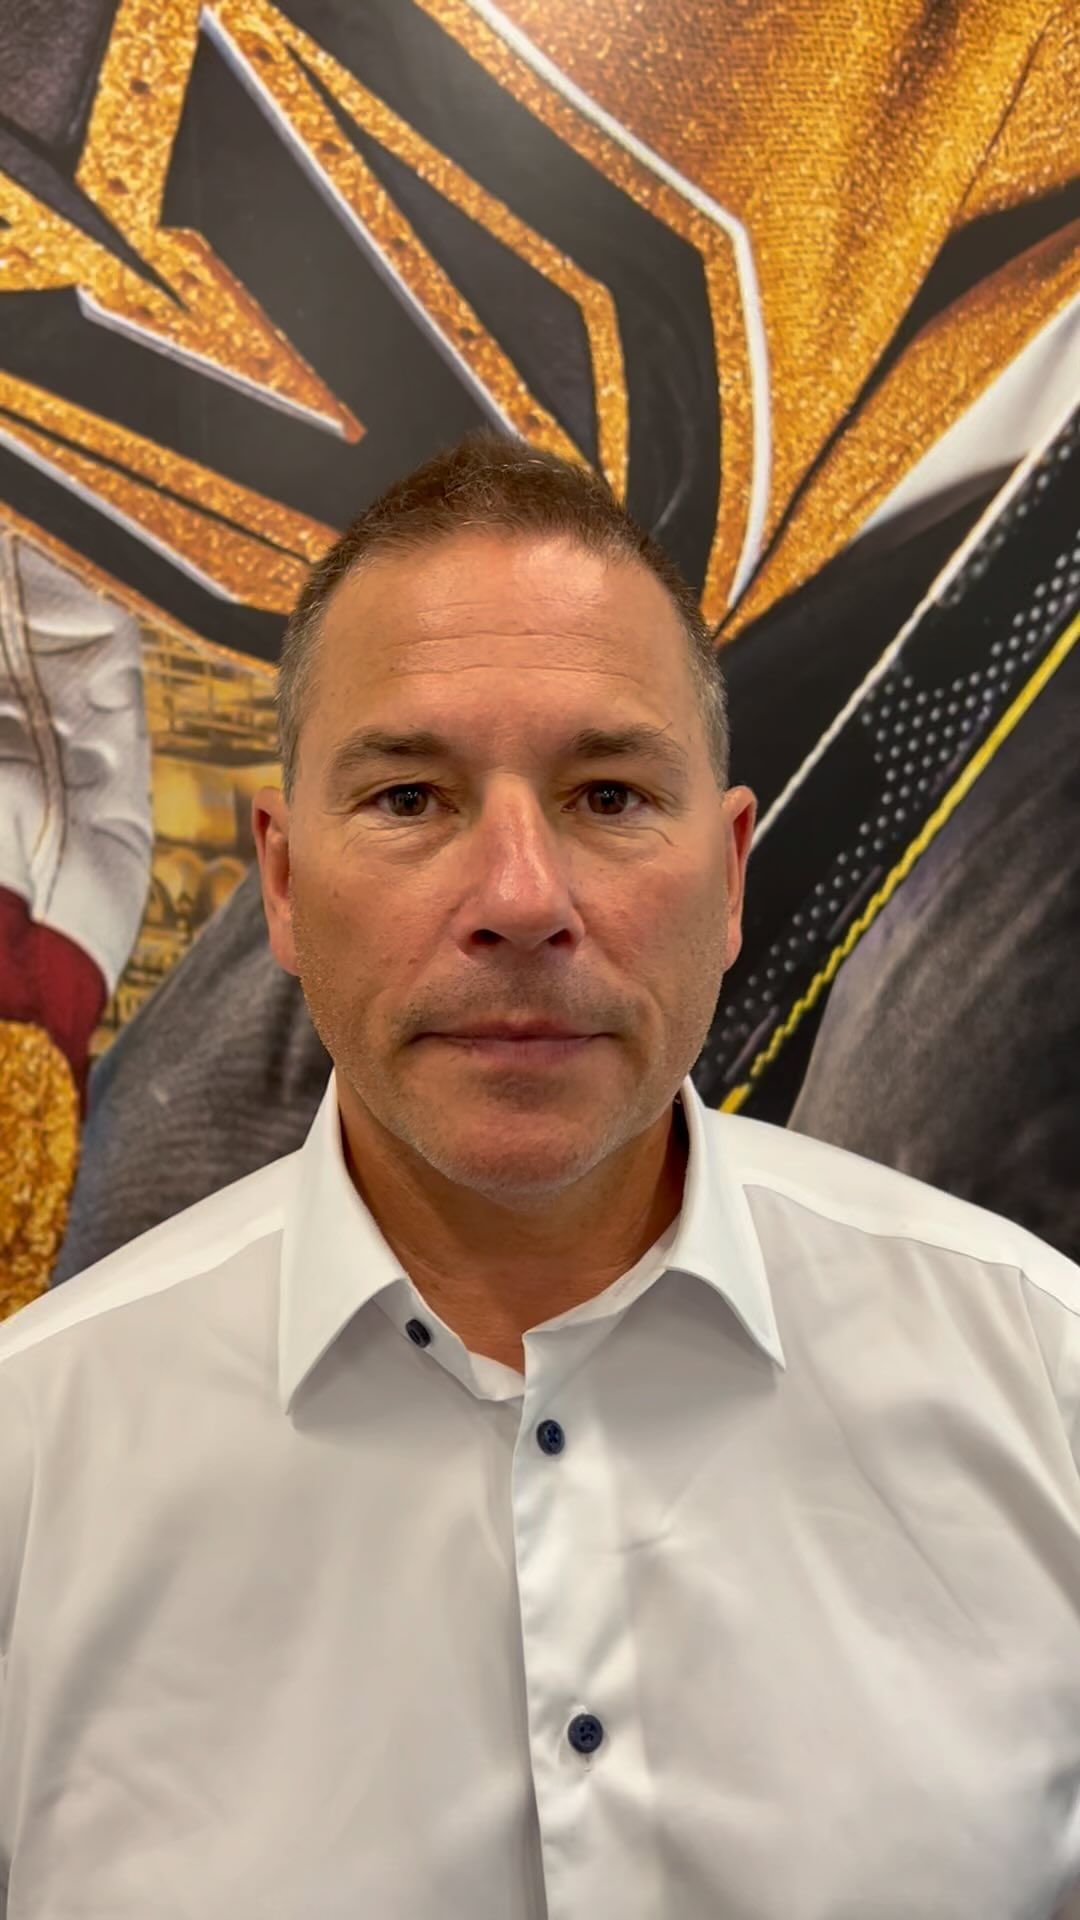 Coach Cassidy has a message for the fans  #VegasBorn...